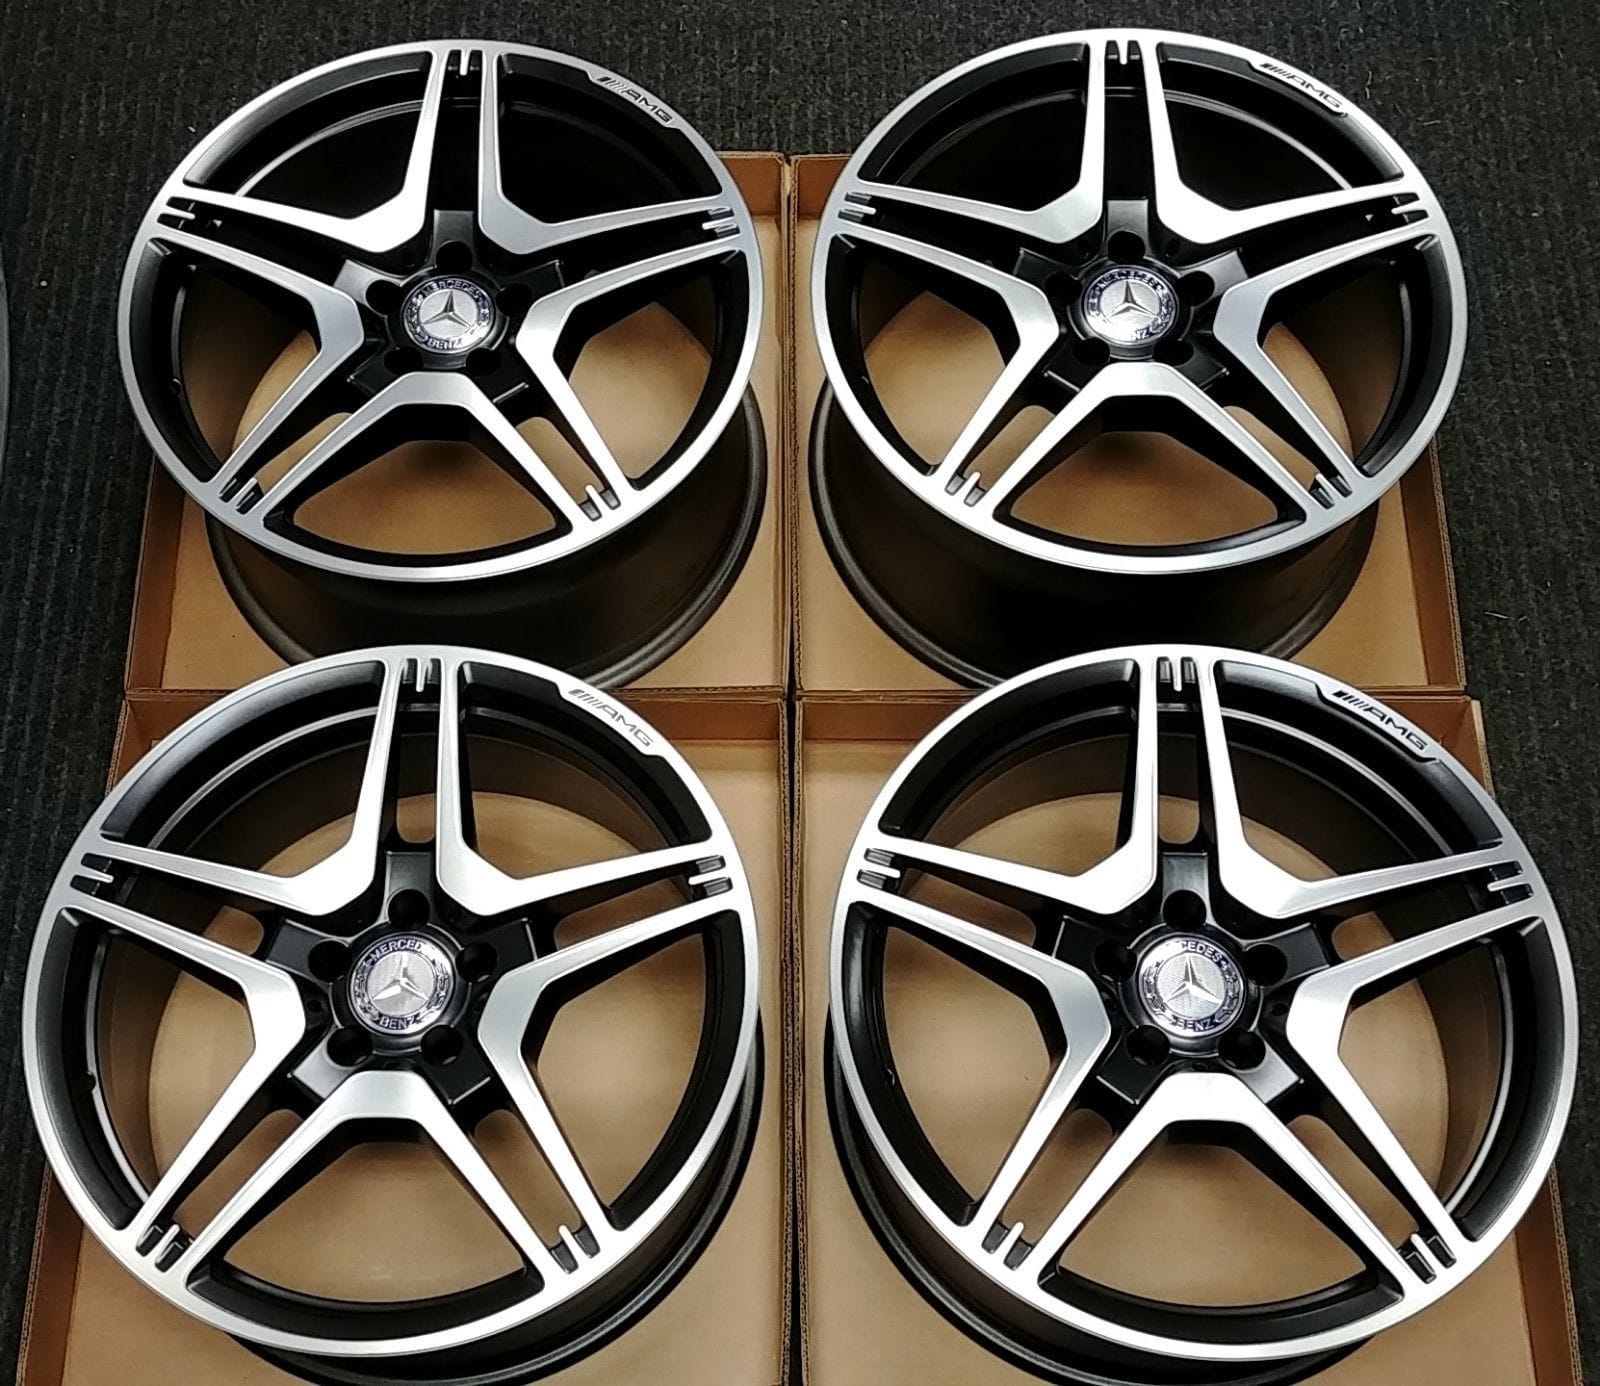 Wheels and Tires/Axles - CLS63 AMG Wheels w/Michelin Pilot SS Tires (NEW) - Used - 2013 to 2016 Mercedes-Benz CLS63 AMG - Los Angeles, CA 90025, United States